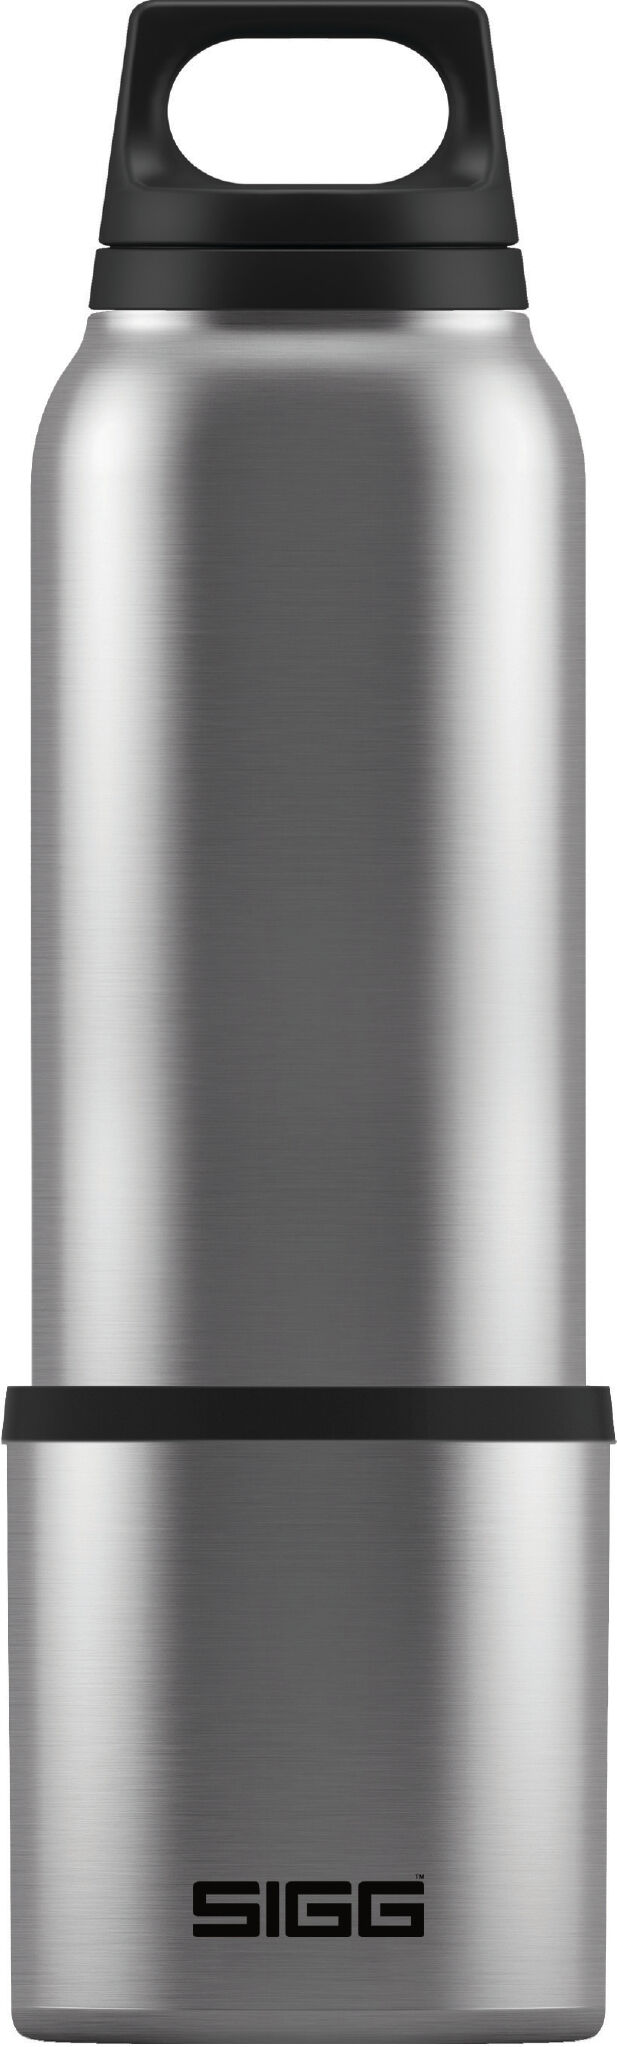 Sigg Hot & Cold 0.75L Avec Cup - Isolierflasche